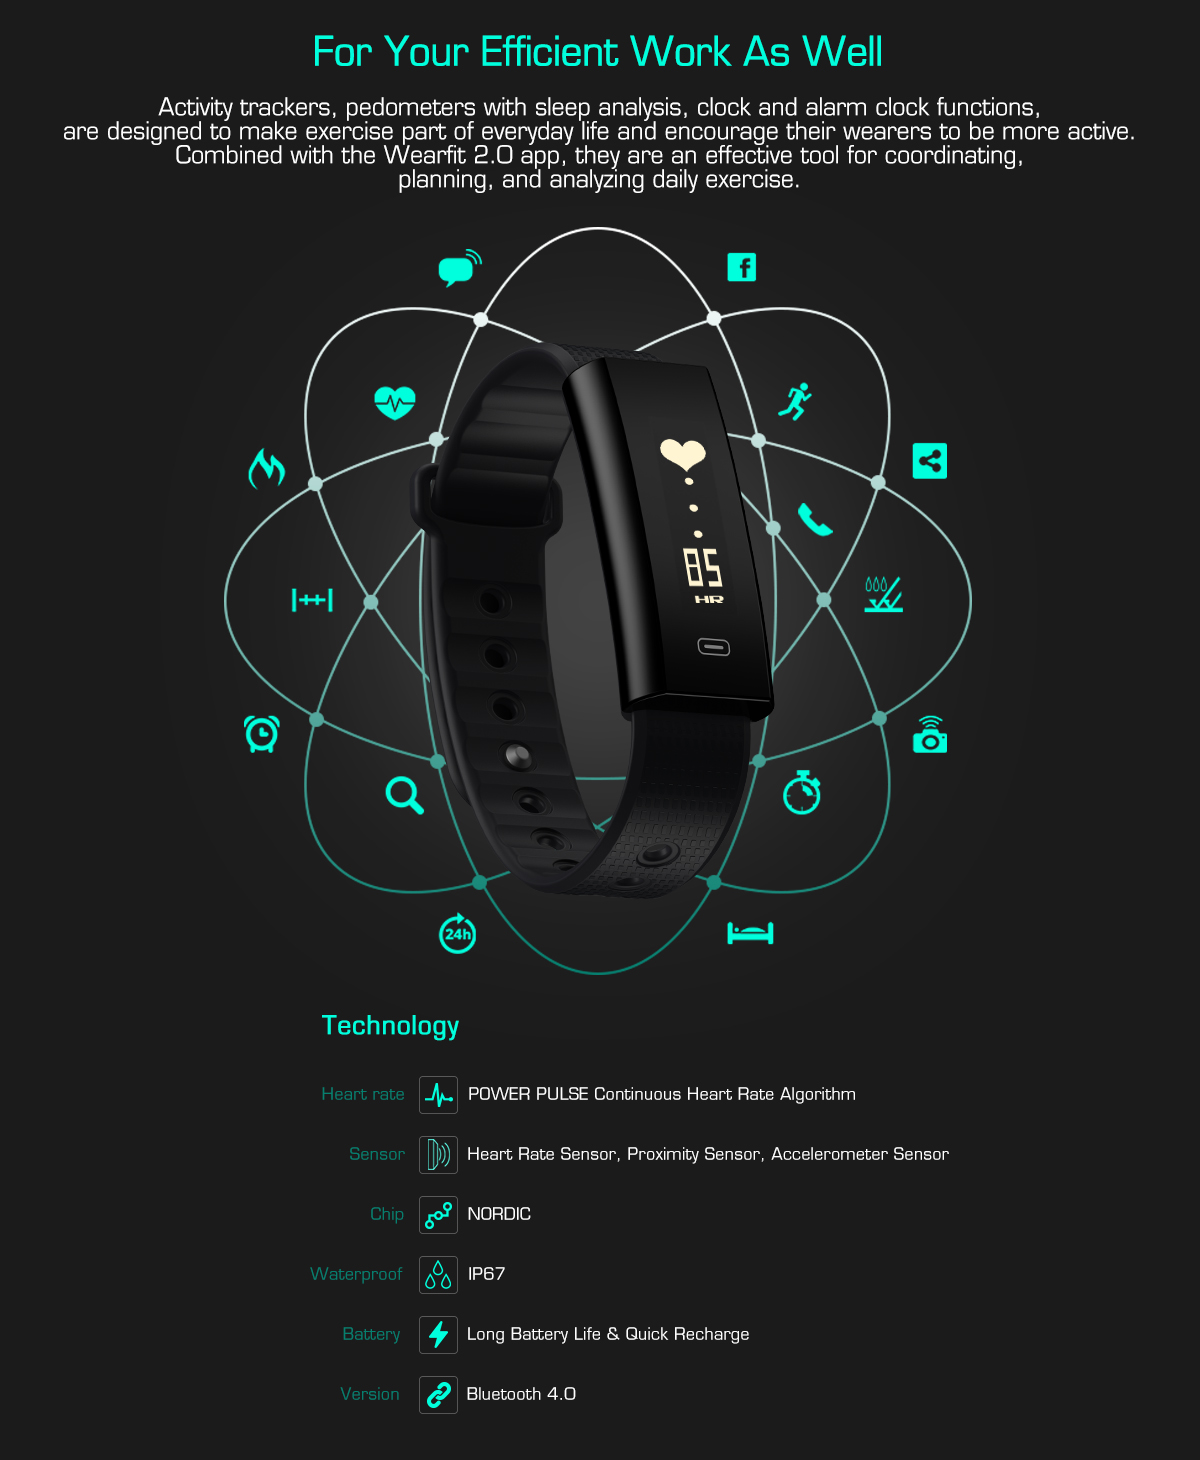 Zeblaze-Arch-Plus-Dynamic-Heart-Rate-Multi-language-Stopwatch-Pedometer-Smart-Watch-for-iOS-Android-1254138